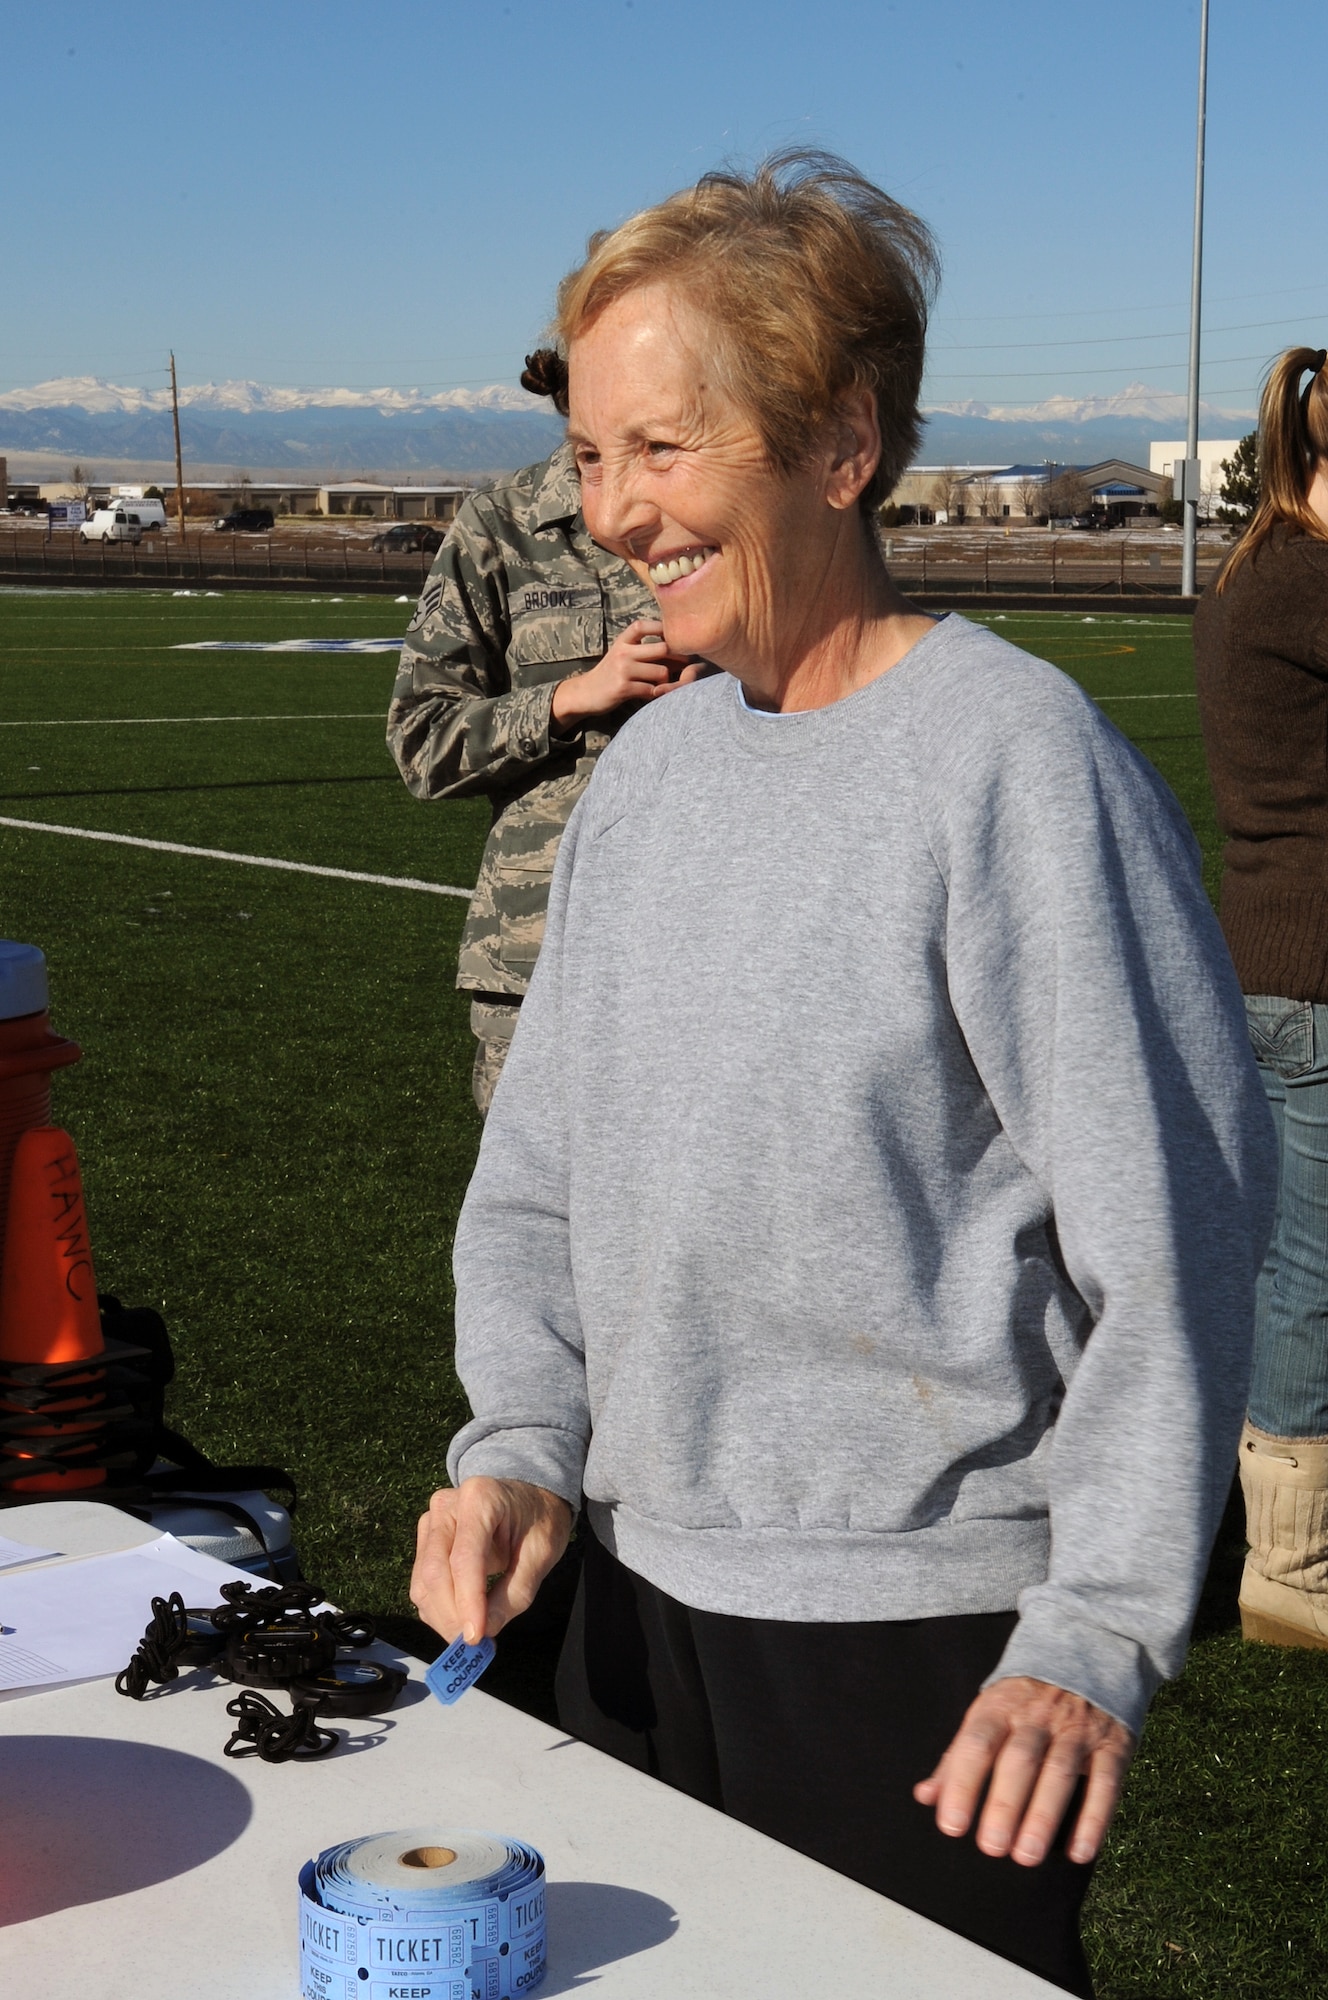 BUCKLEY AIR FORCE BASE, Colo. -- Louis Richard hands out tickets during the Turkey Trot Nov. 18. Mrs. Richard is an Army retiree who volunteers regularly at the Buckley Fitness Center. (U.S. Air Force Photo by Airman First Class Marcy Glass)
